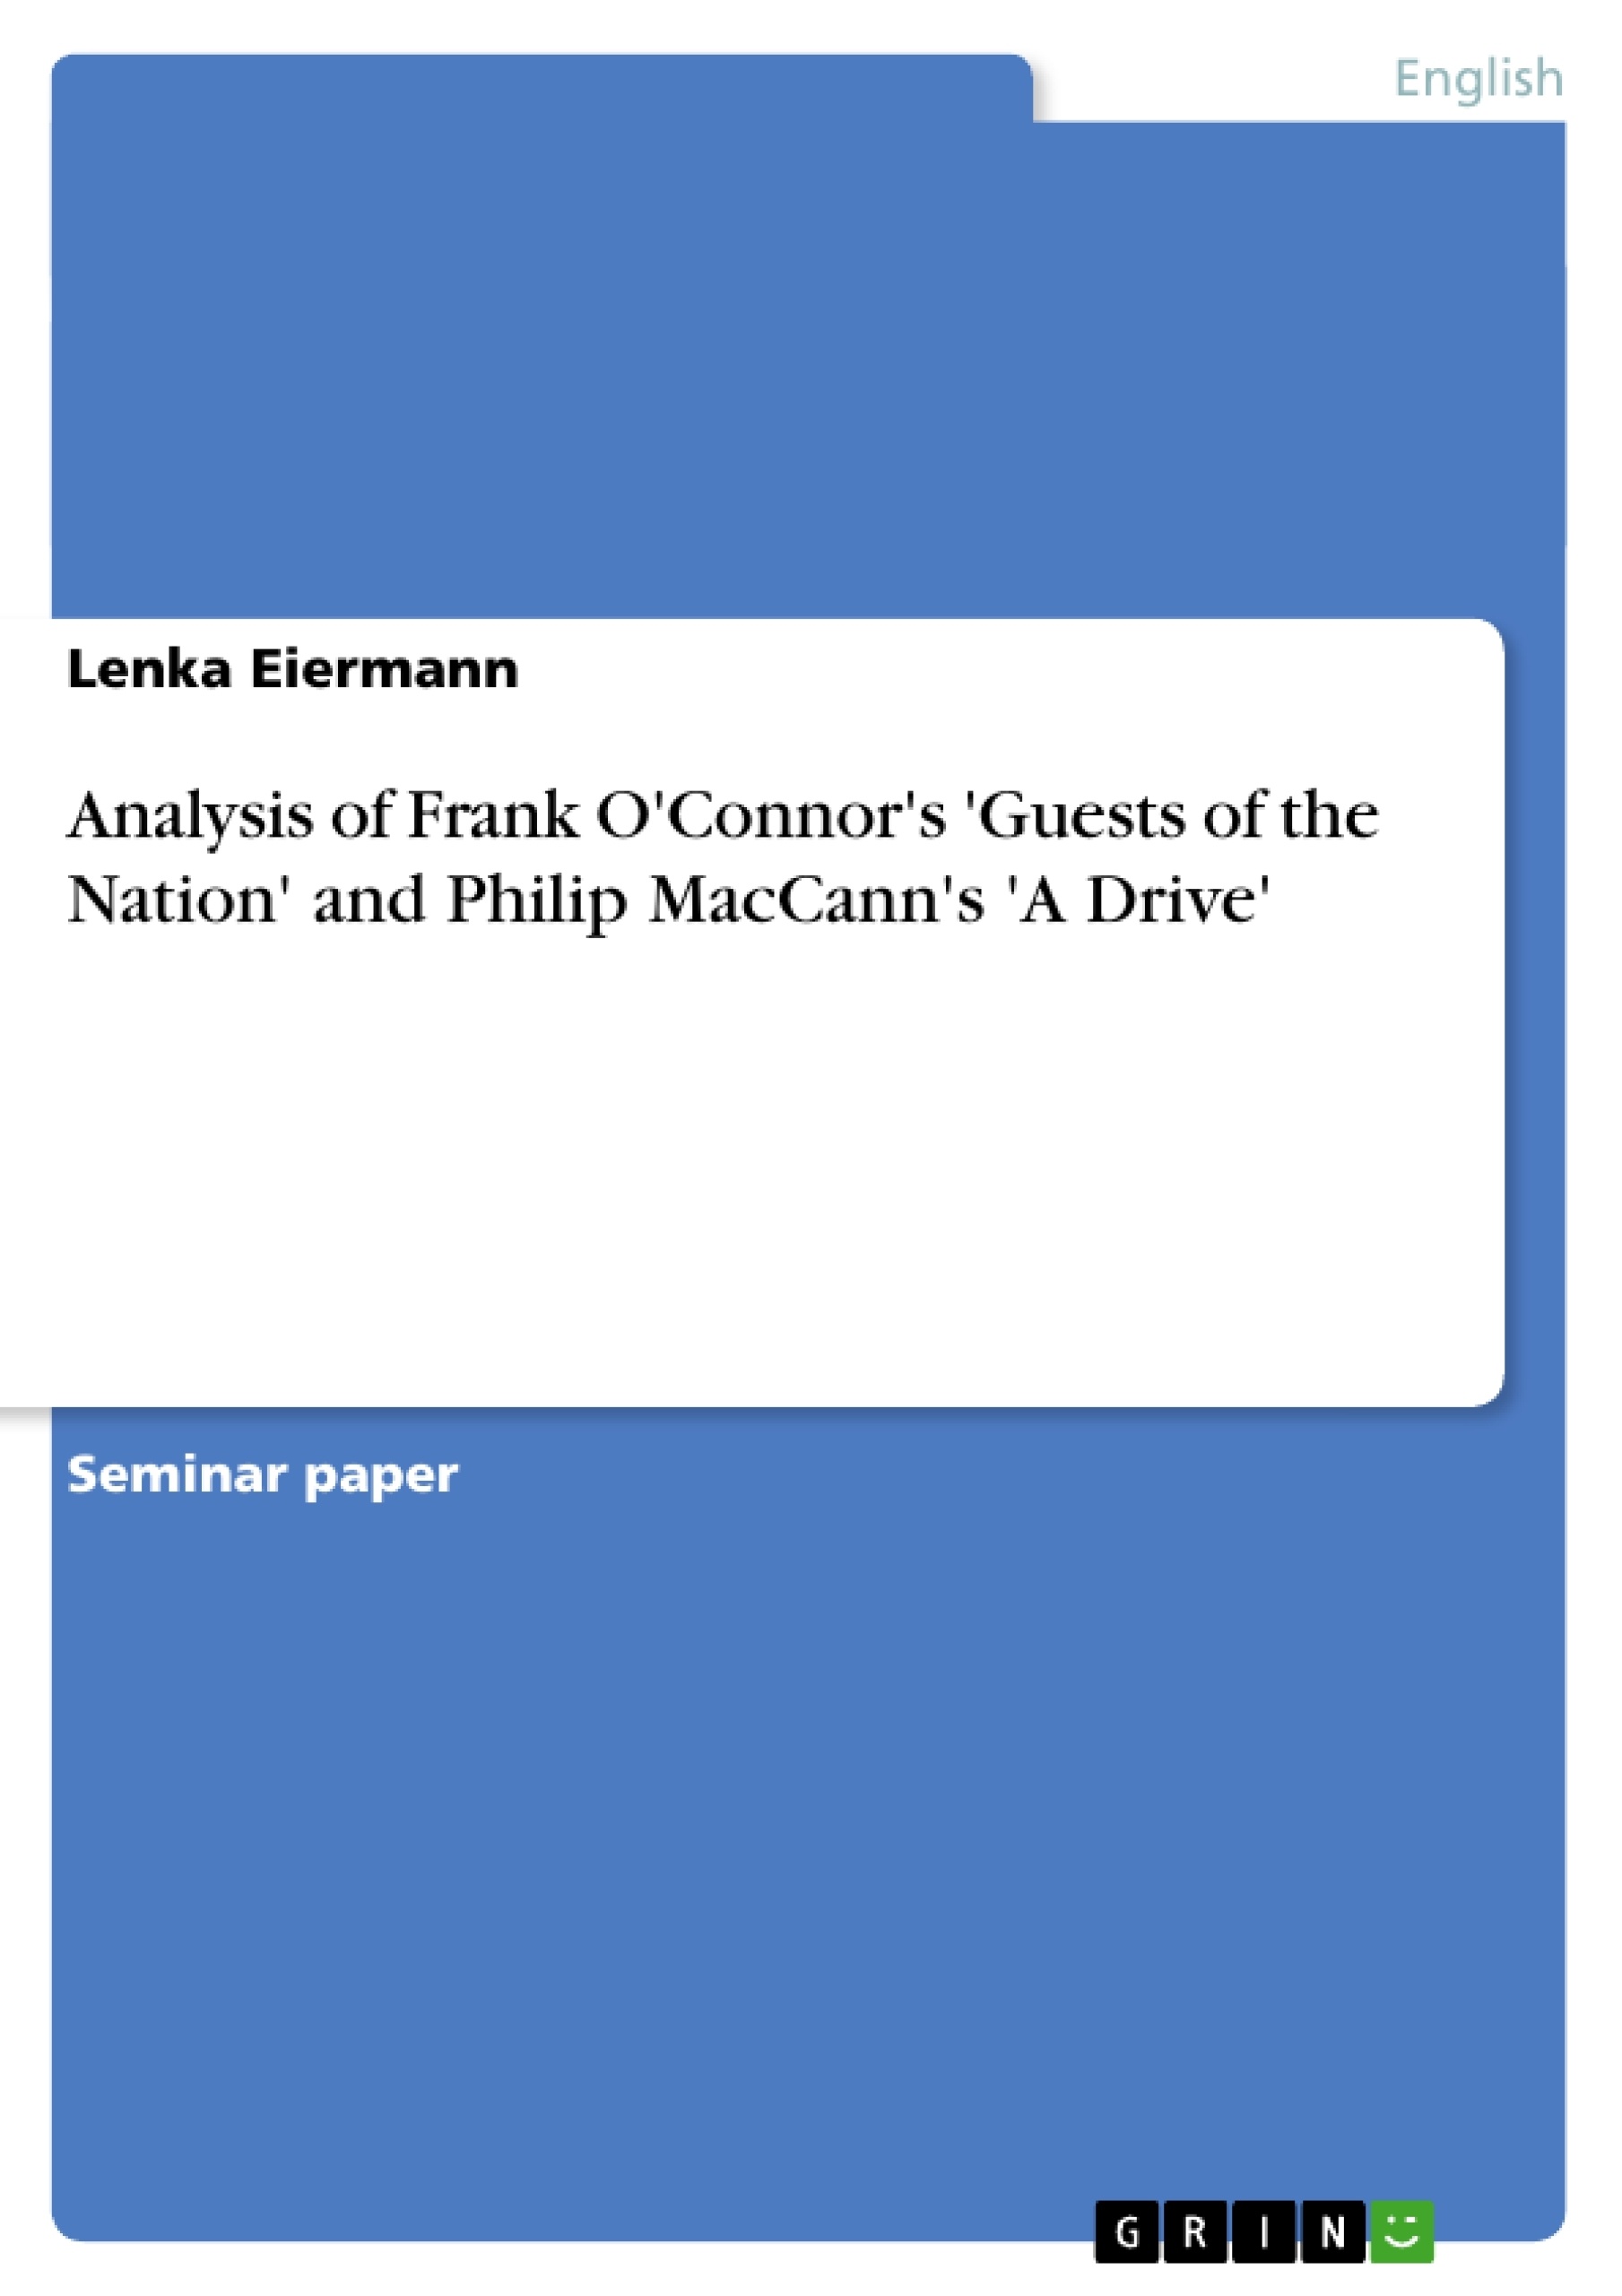 Titre: Analysis of Frank O'Connor's 'Guests of the Nation' and Philip MacCann's 'A Drive'